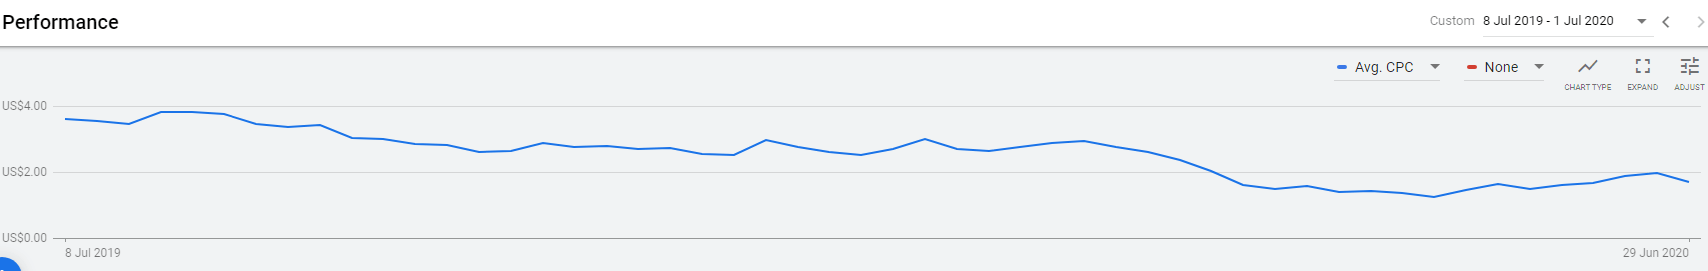 Weekly trend of Google Ads average cost-per-click over the past year